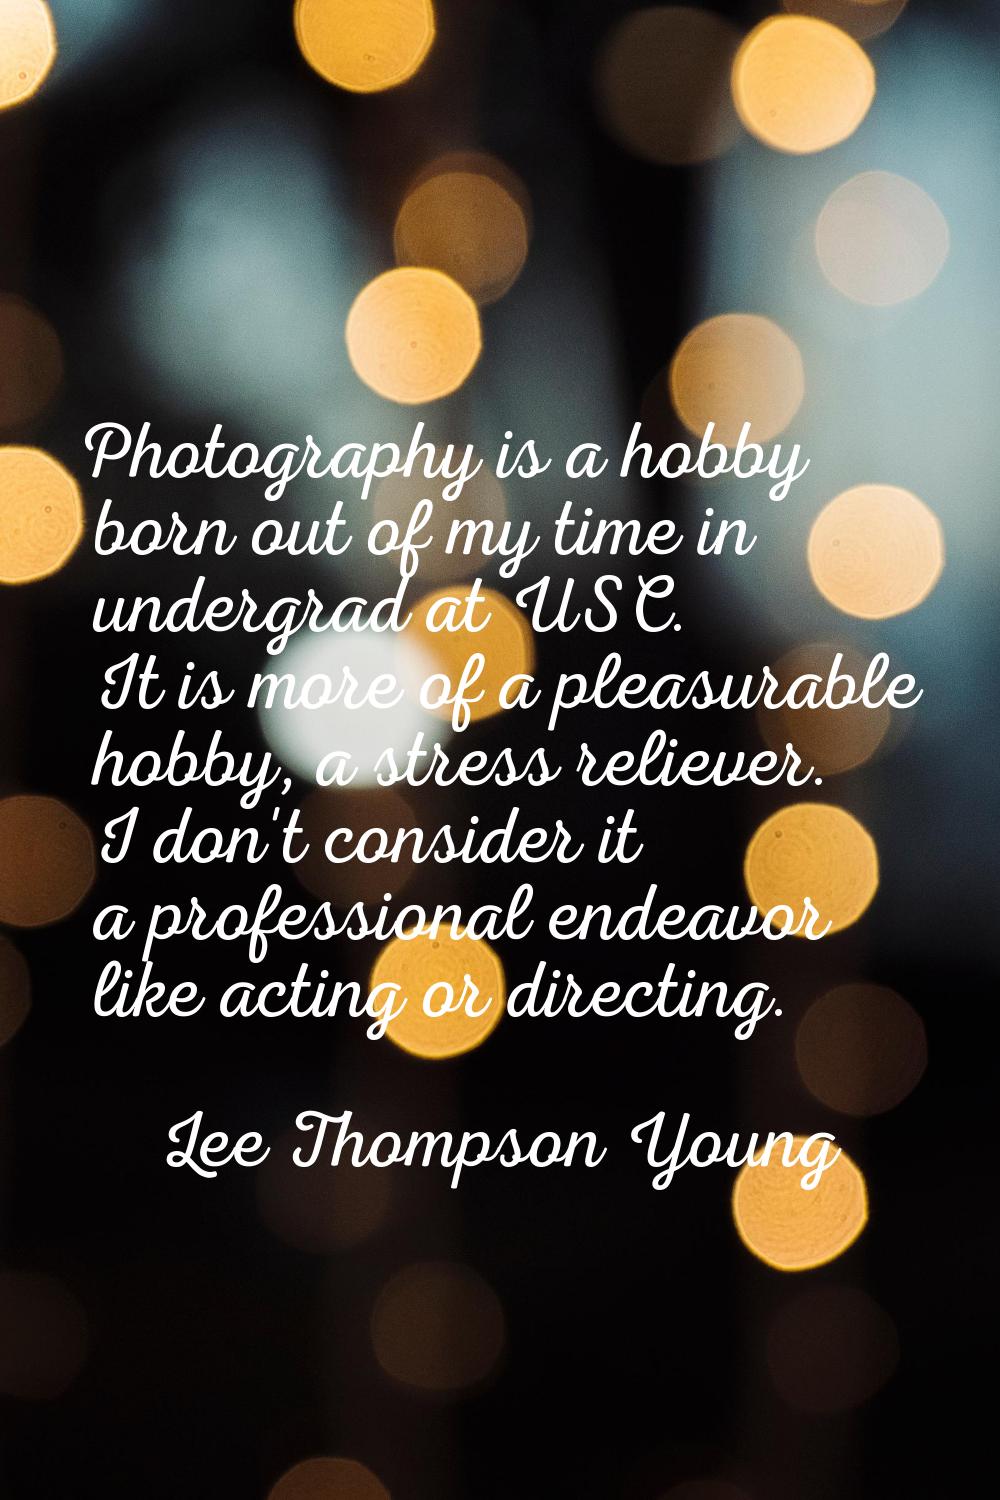 Photography is a hobby born out of my time in undergrad at USC. It is more of a pleasurable hobby, 